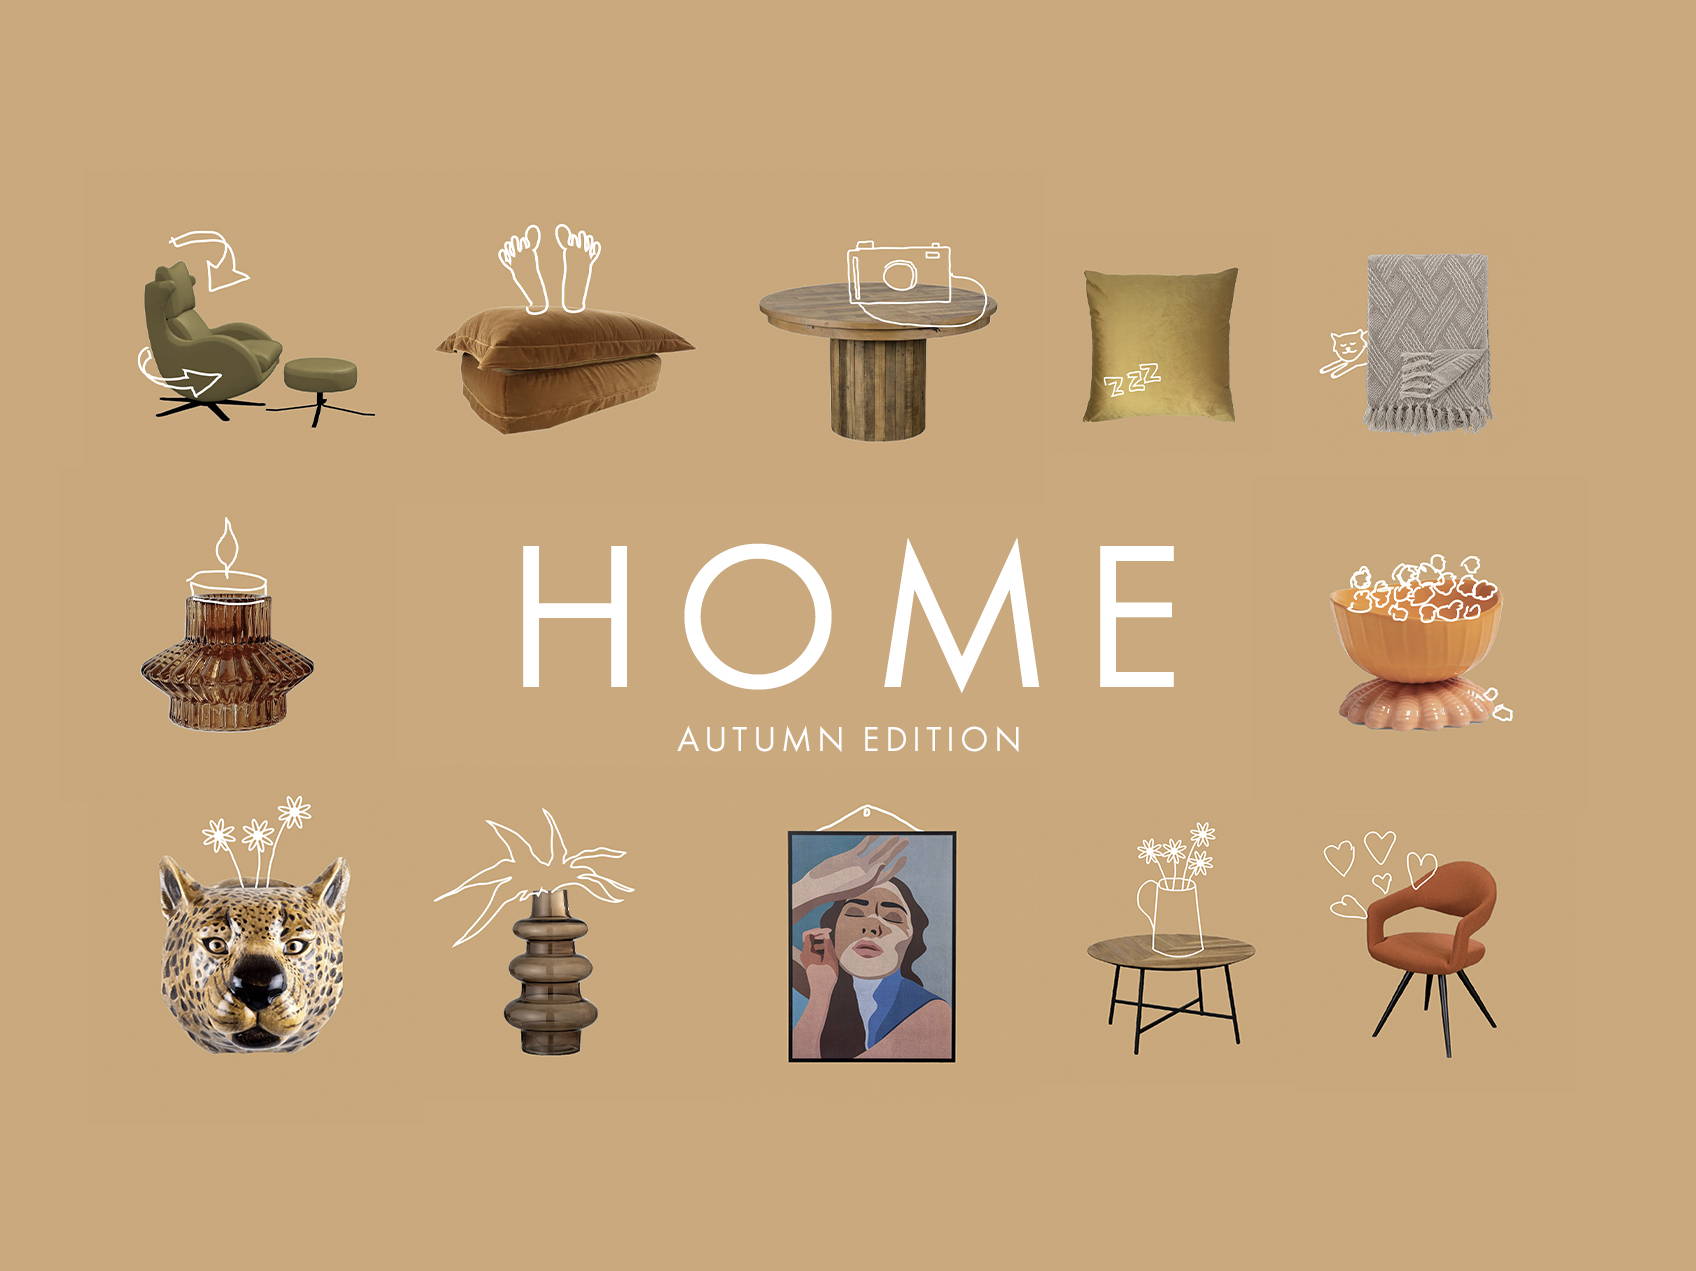 Autumn Edition Now On At BF Home - Read The latest Blog Here